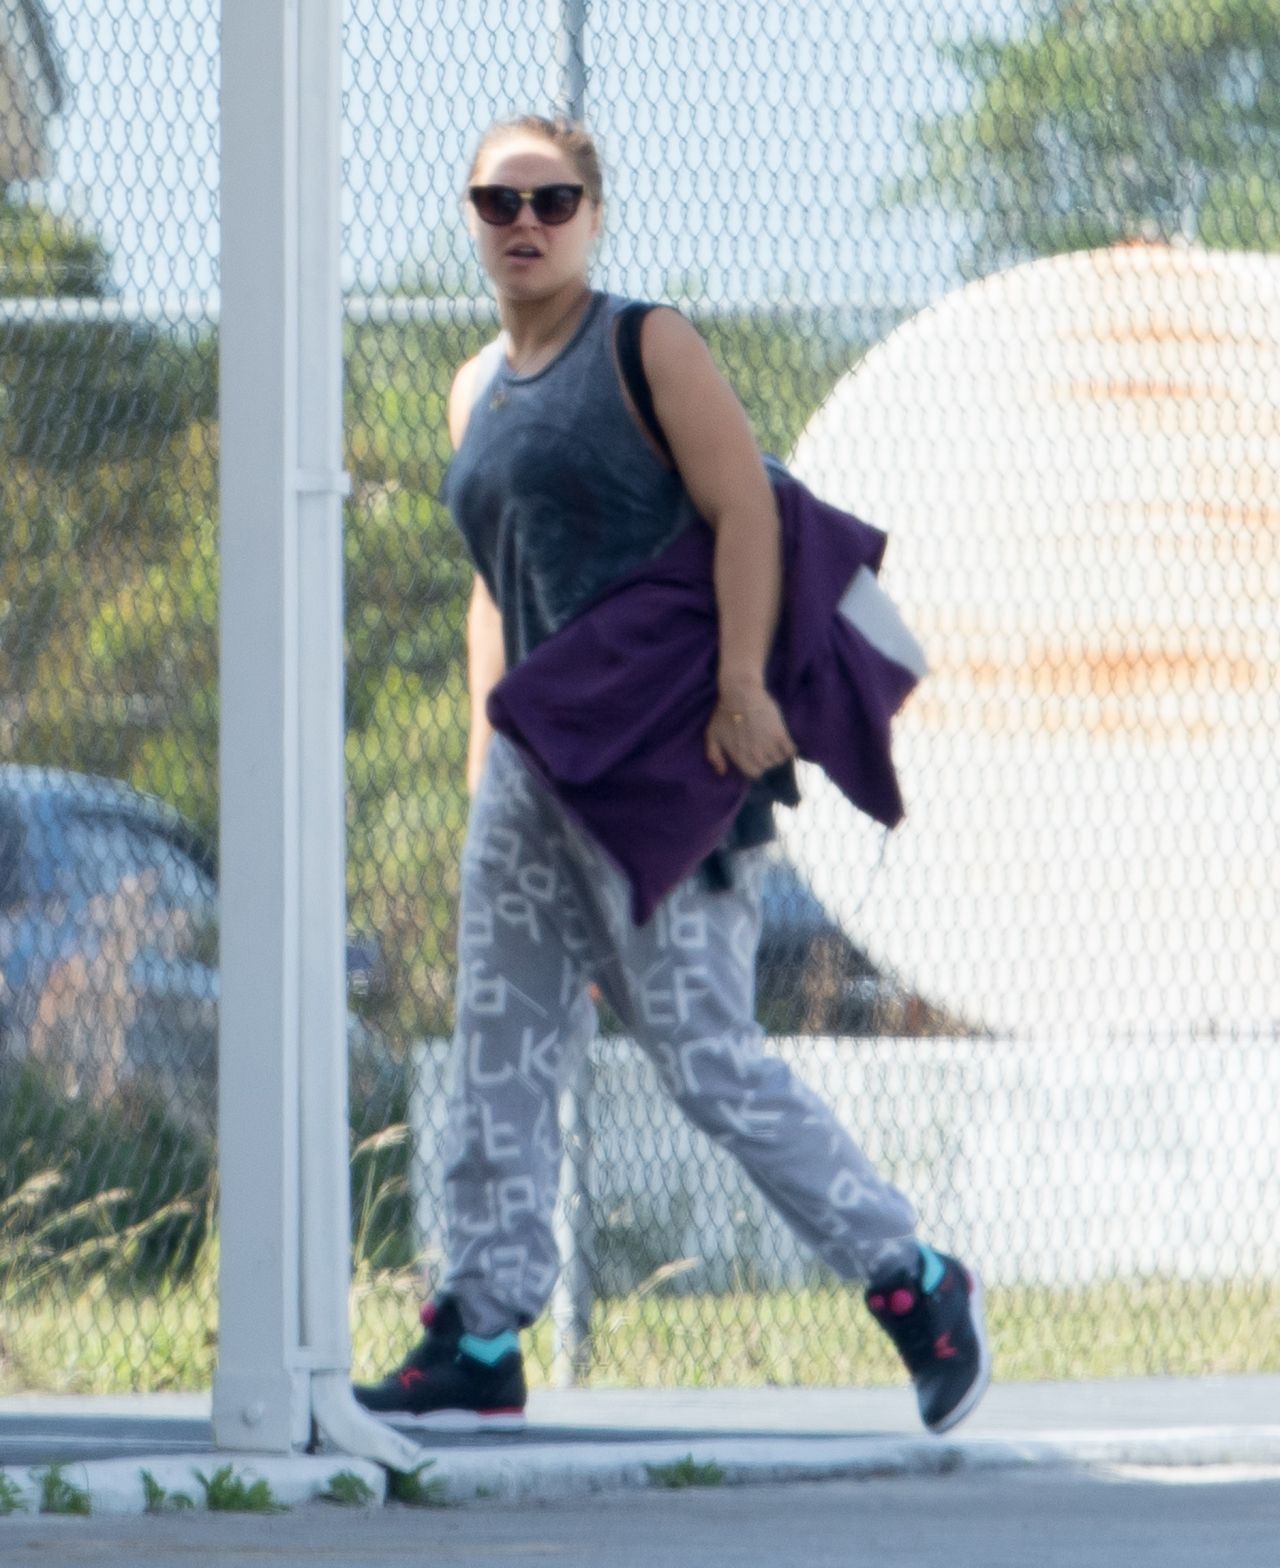 https://celebmafia.com/wp-content/uploads/2016/01/ronda-rousey-arrives-to-an-airport-in-the-bahamas-1-28-2016-5.jpg